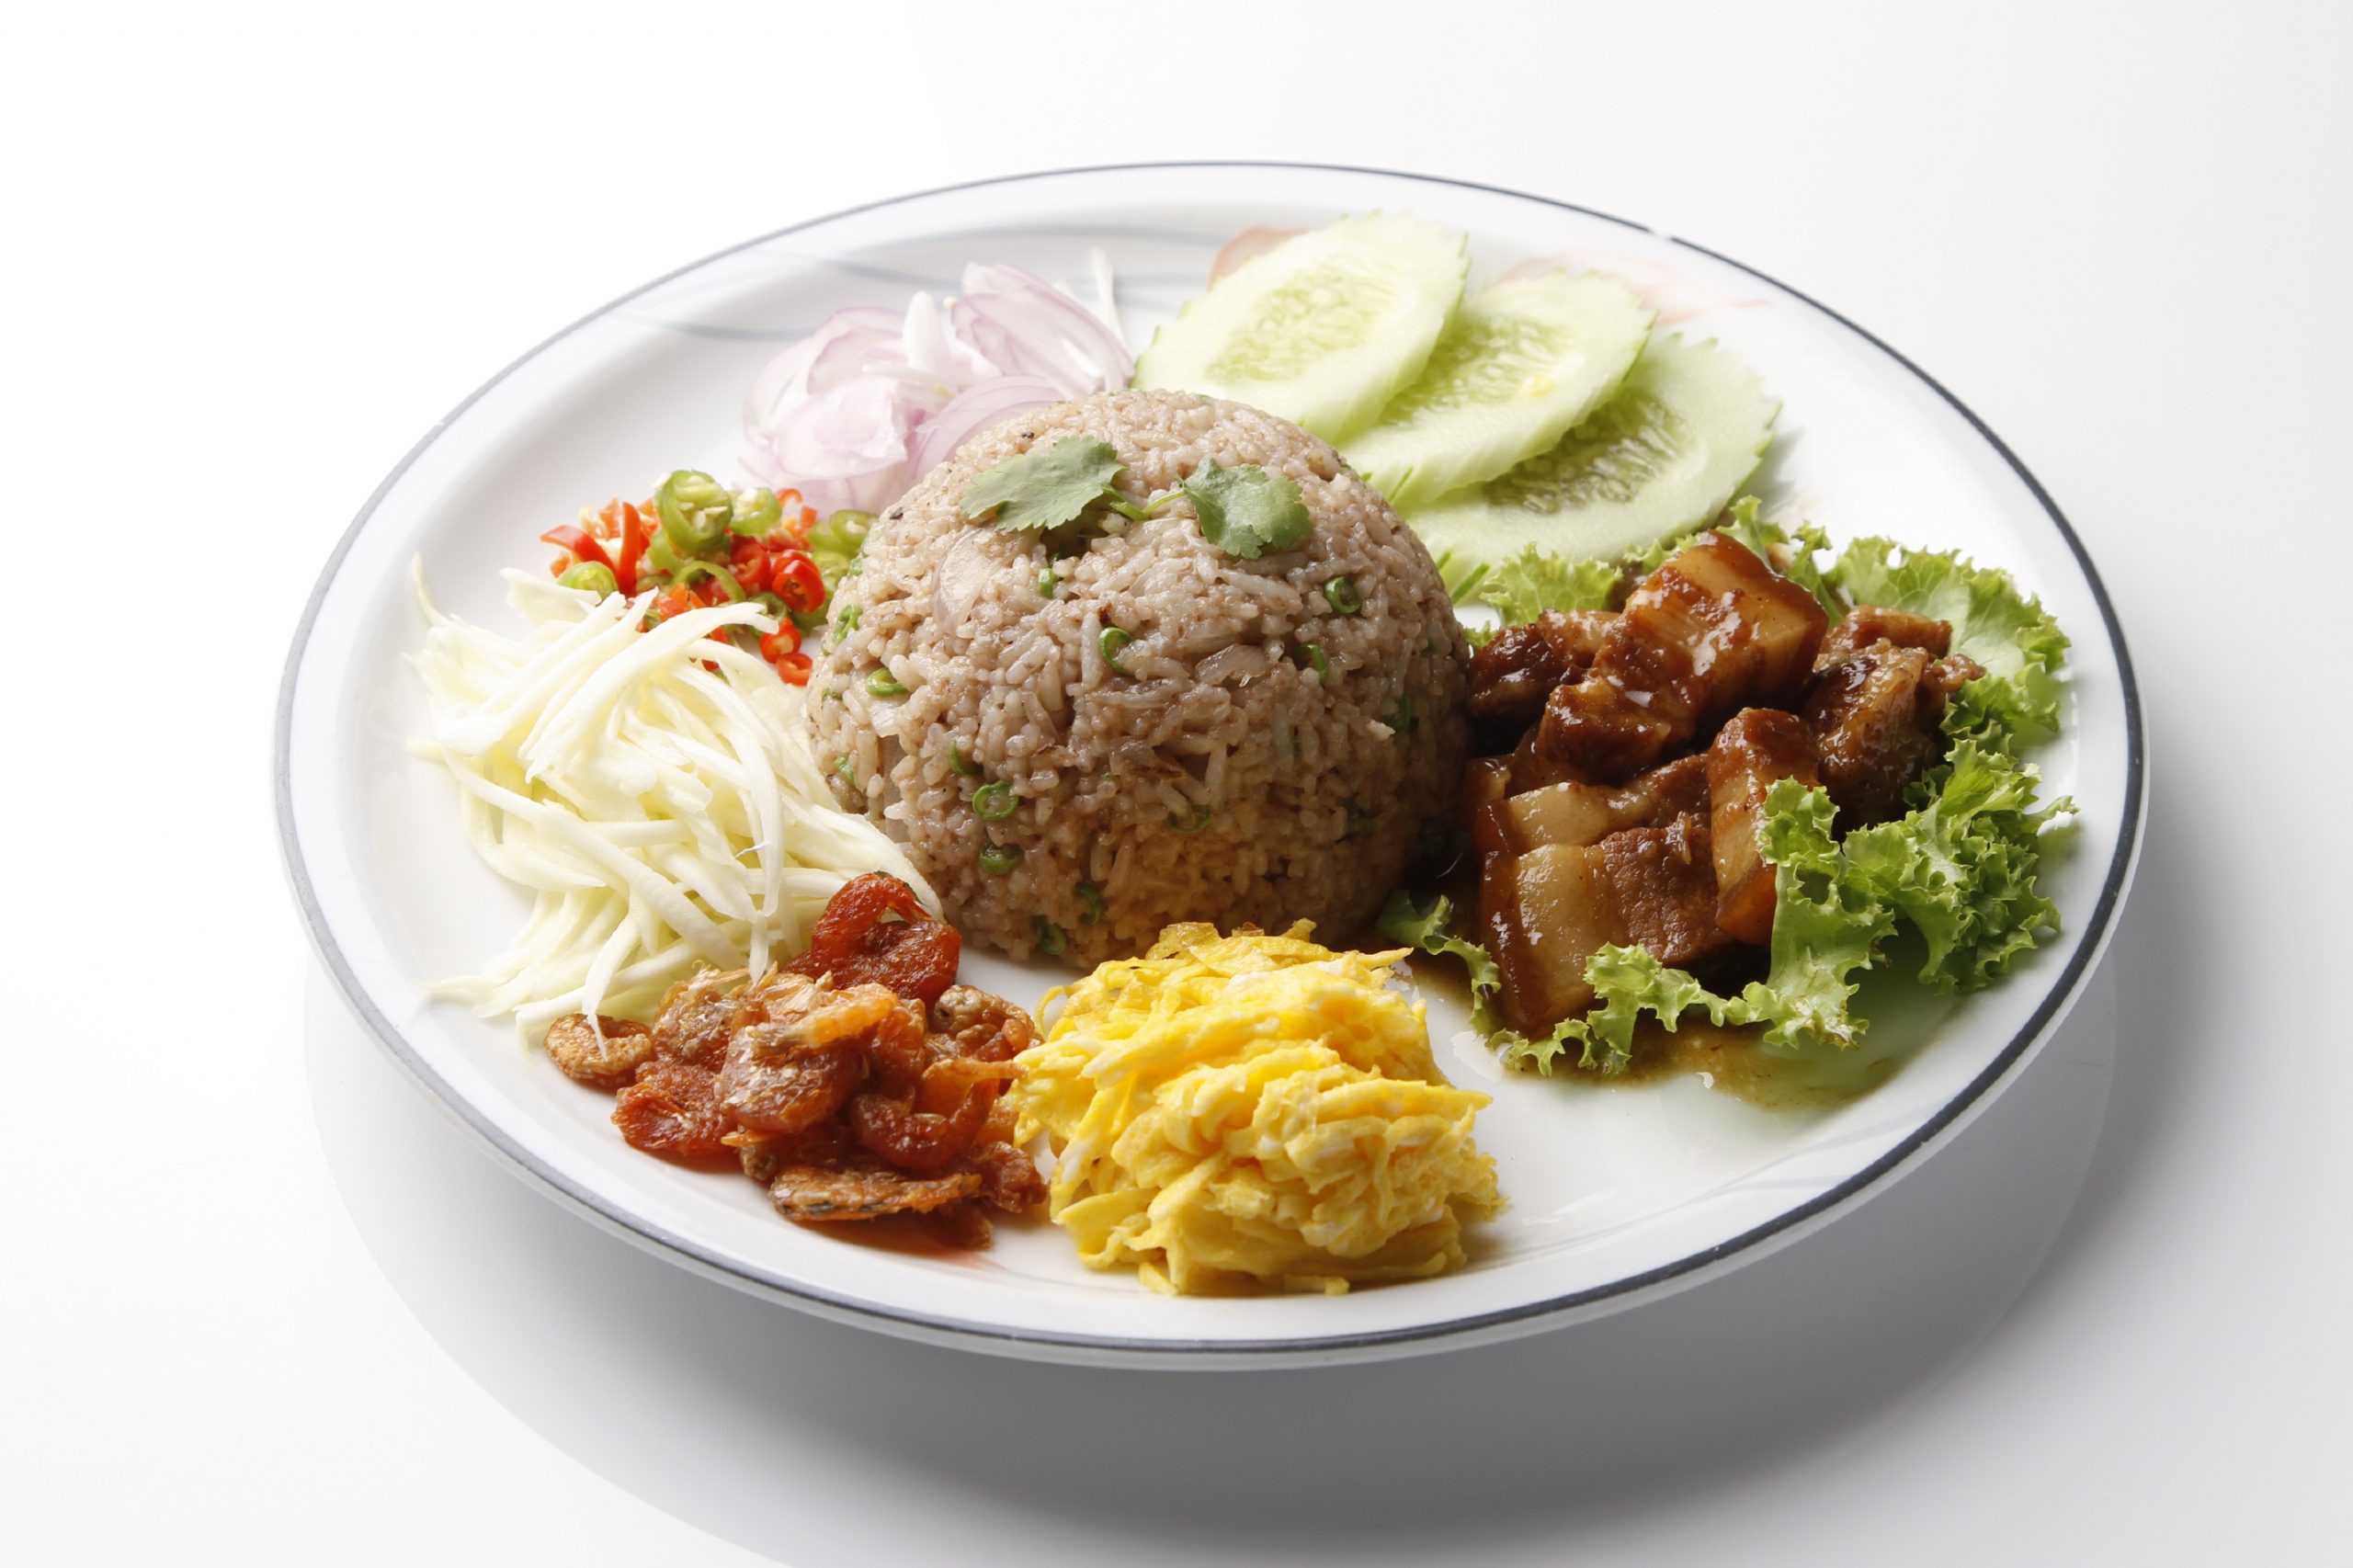 Dont Go Hungry! Call Kantary House Hotel, Bangkok for Great Food Delivery